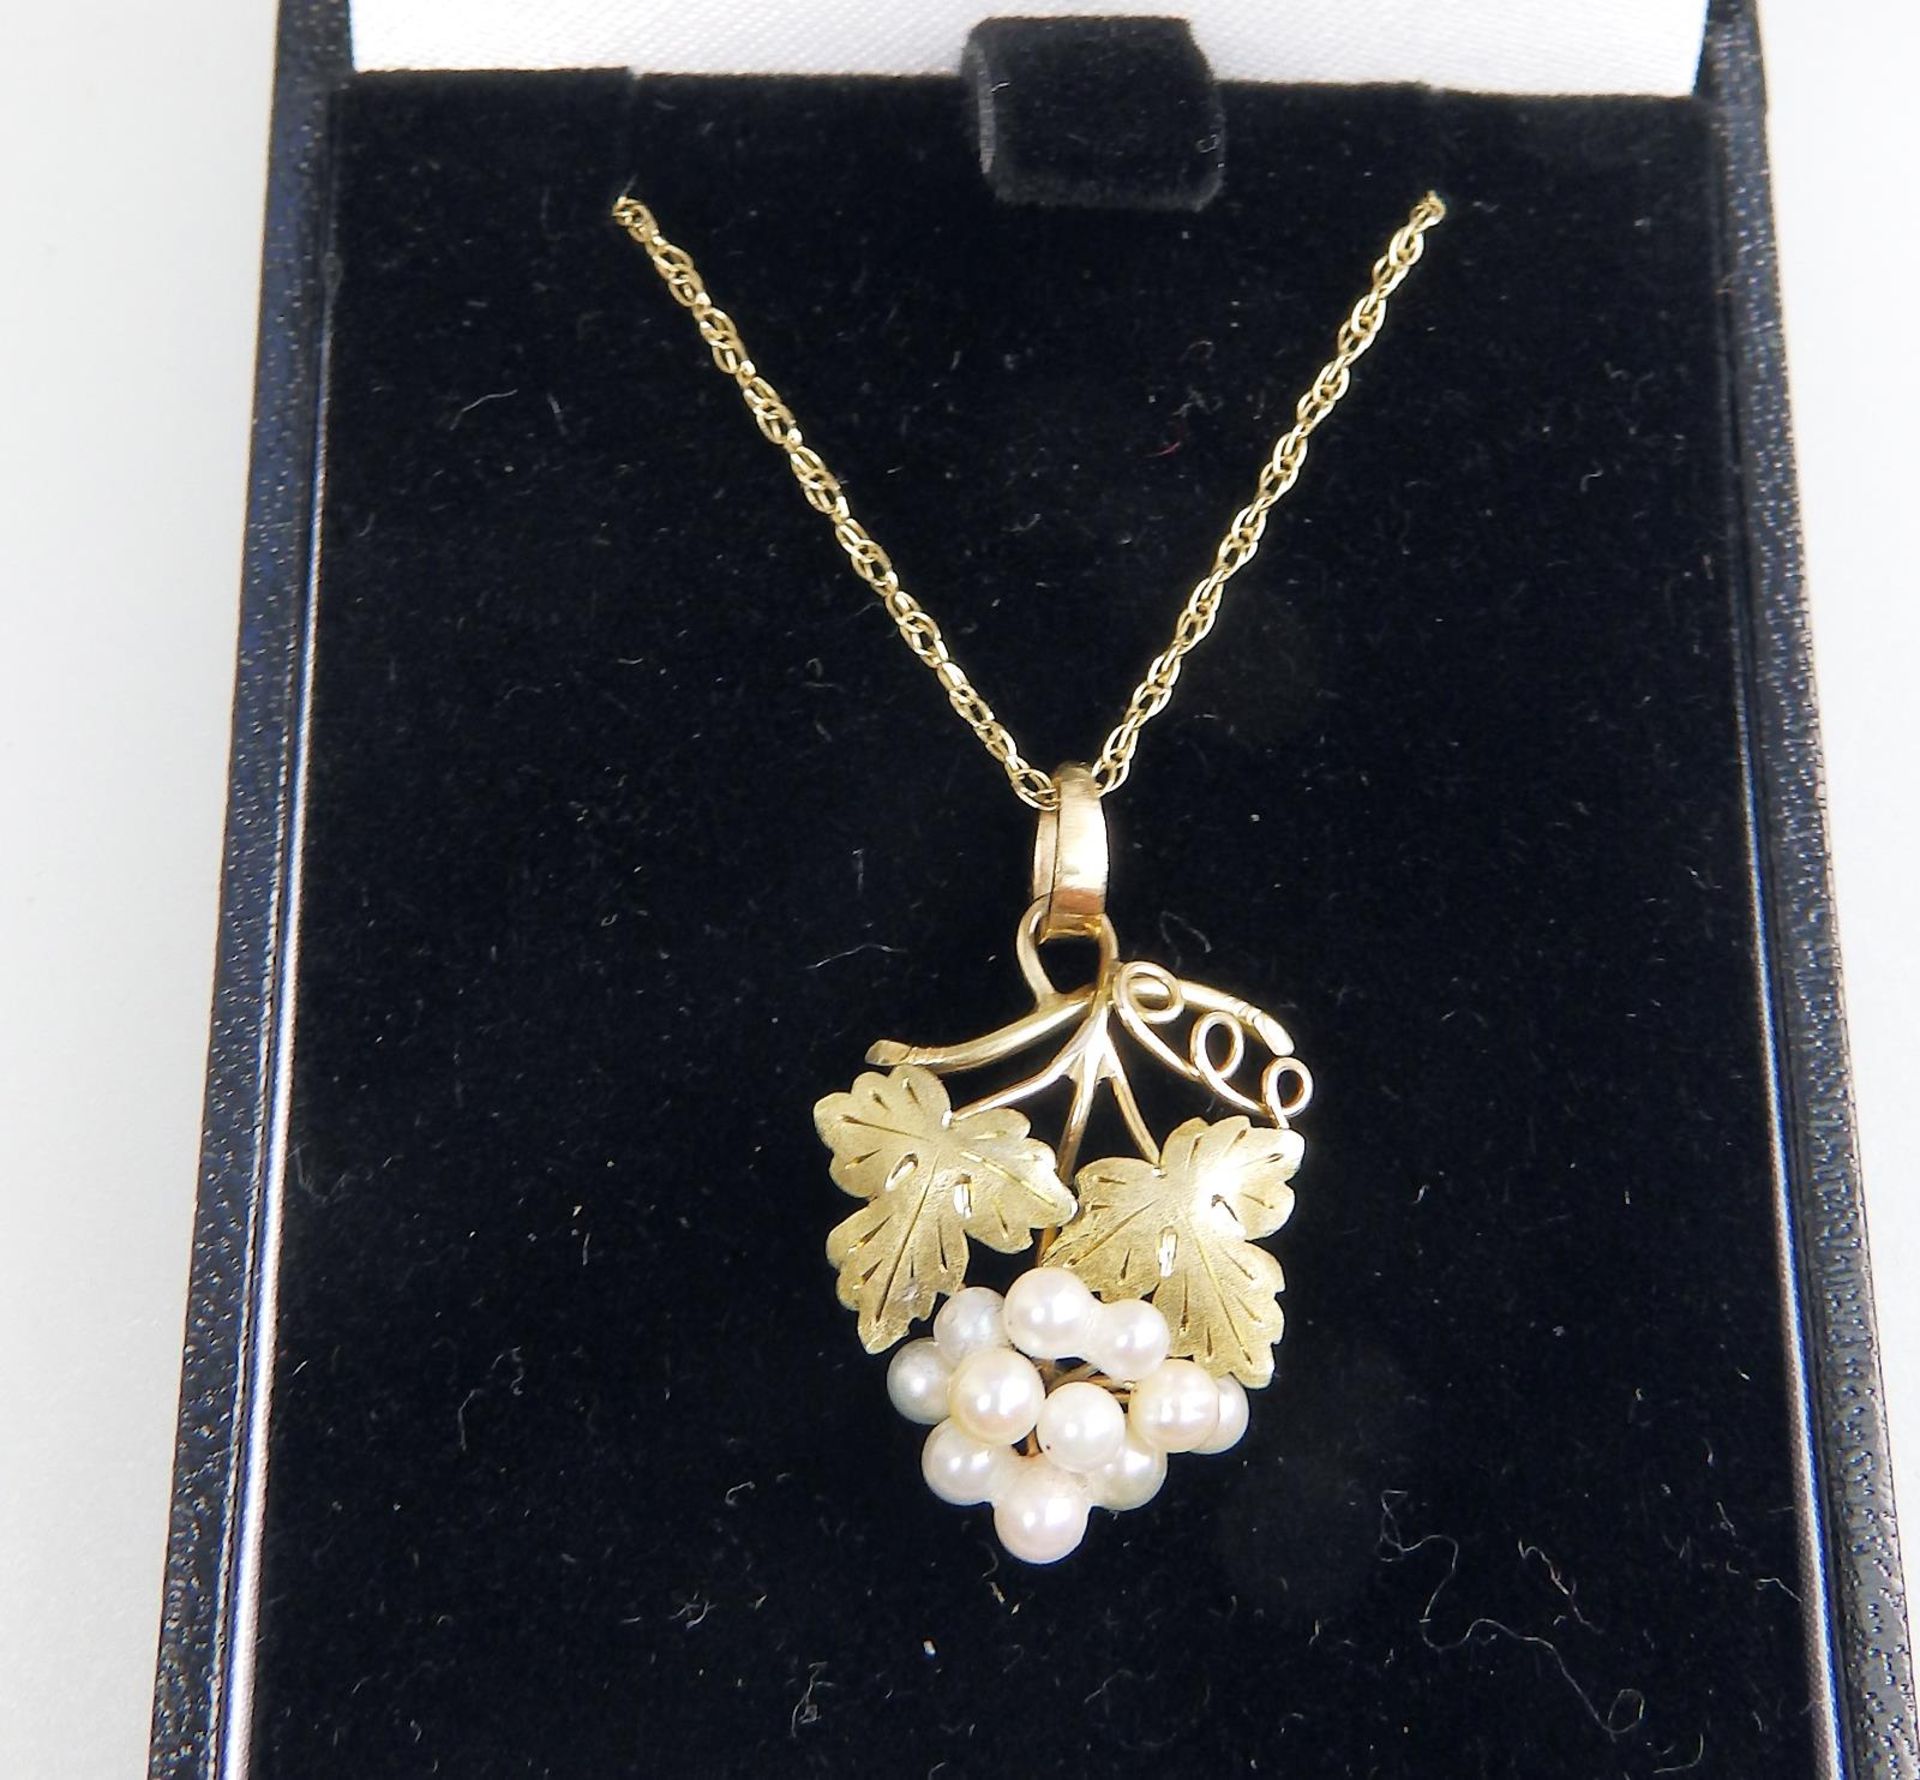 A 14 ct gold designer Pendant and chain, boxed